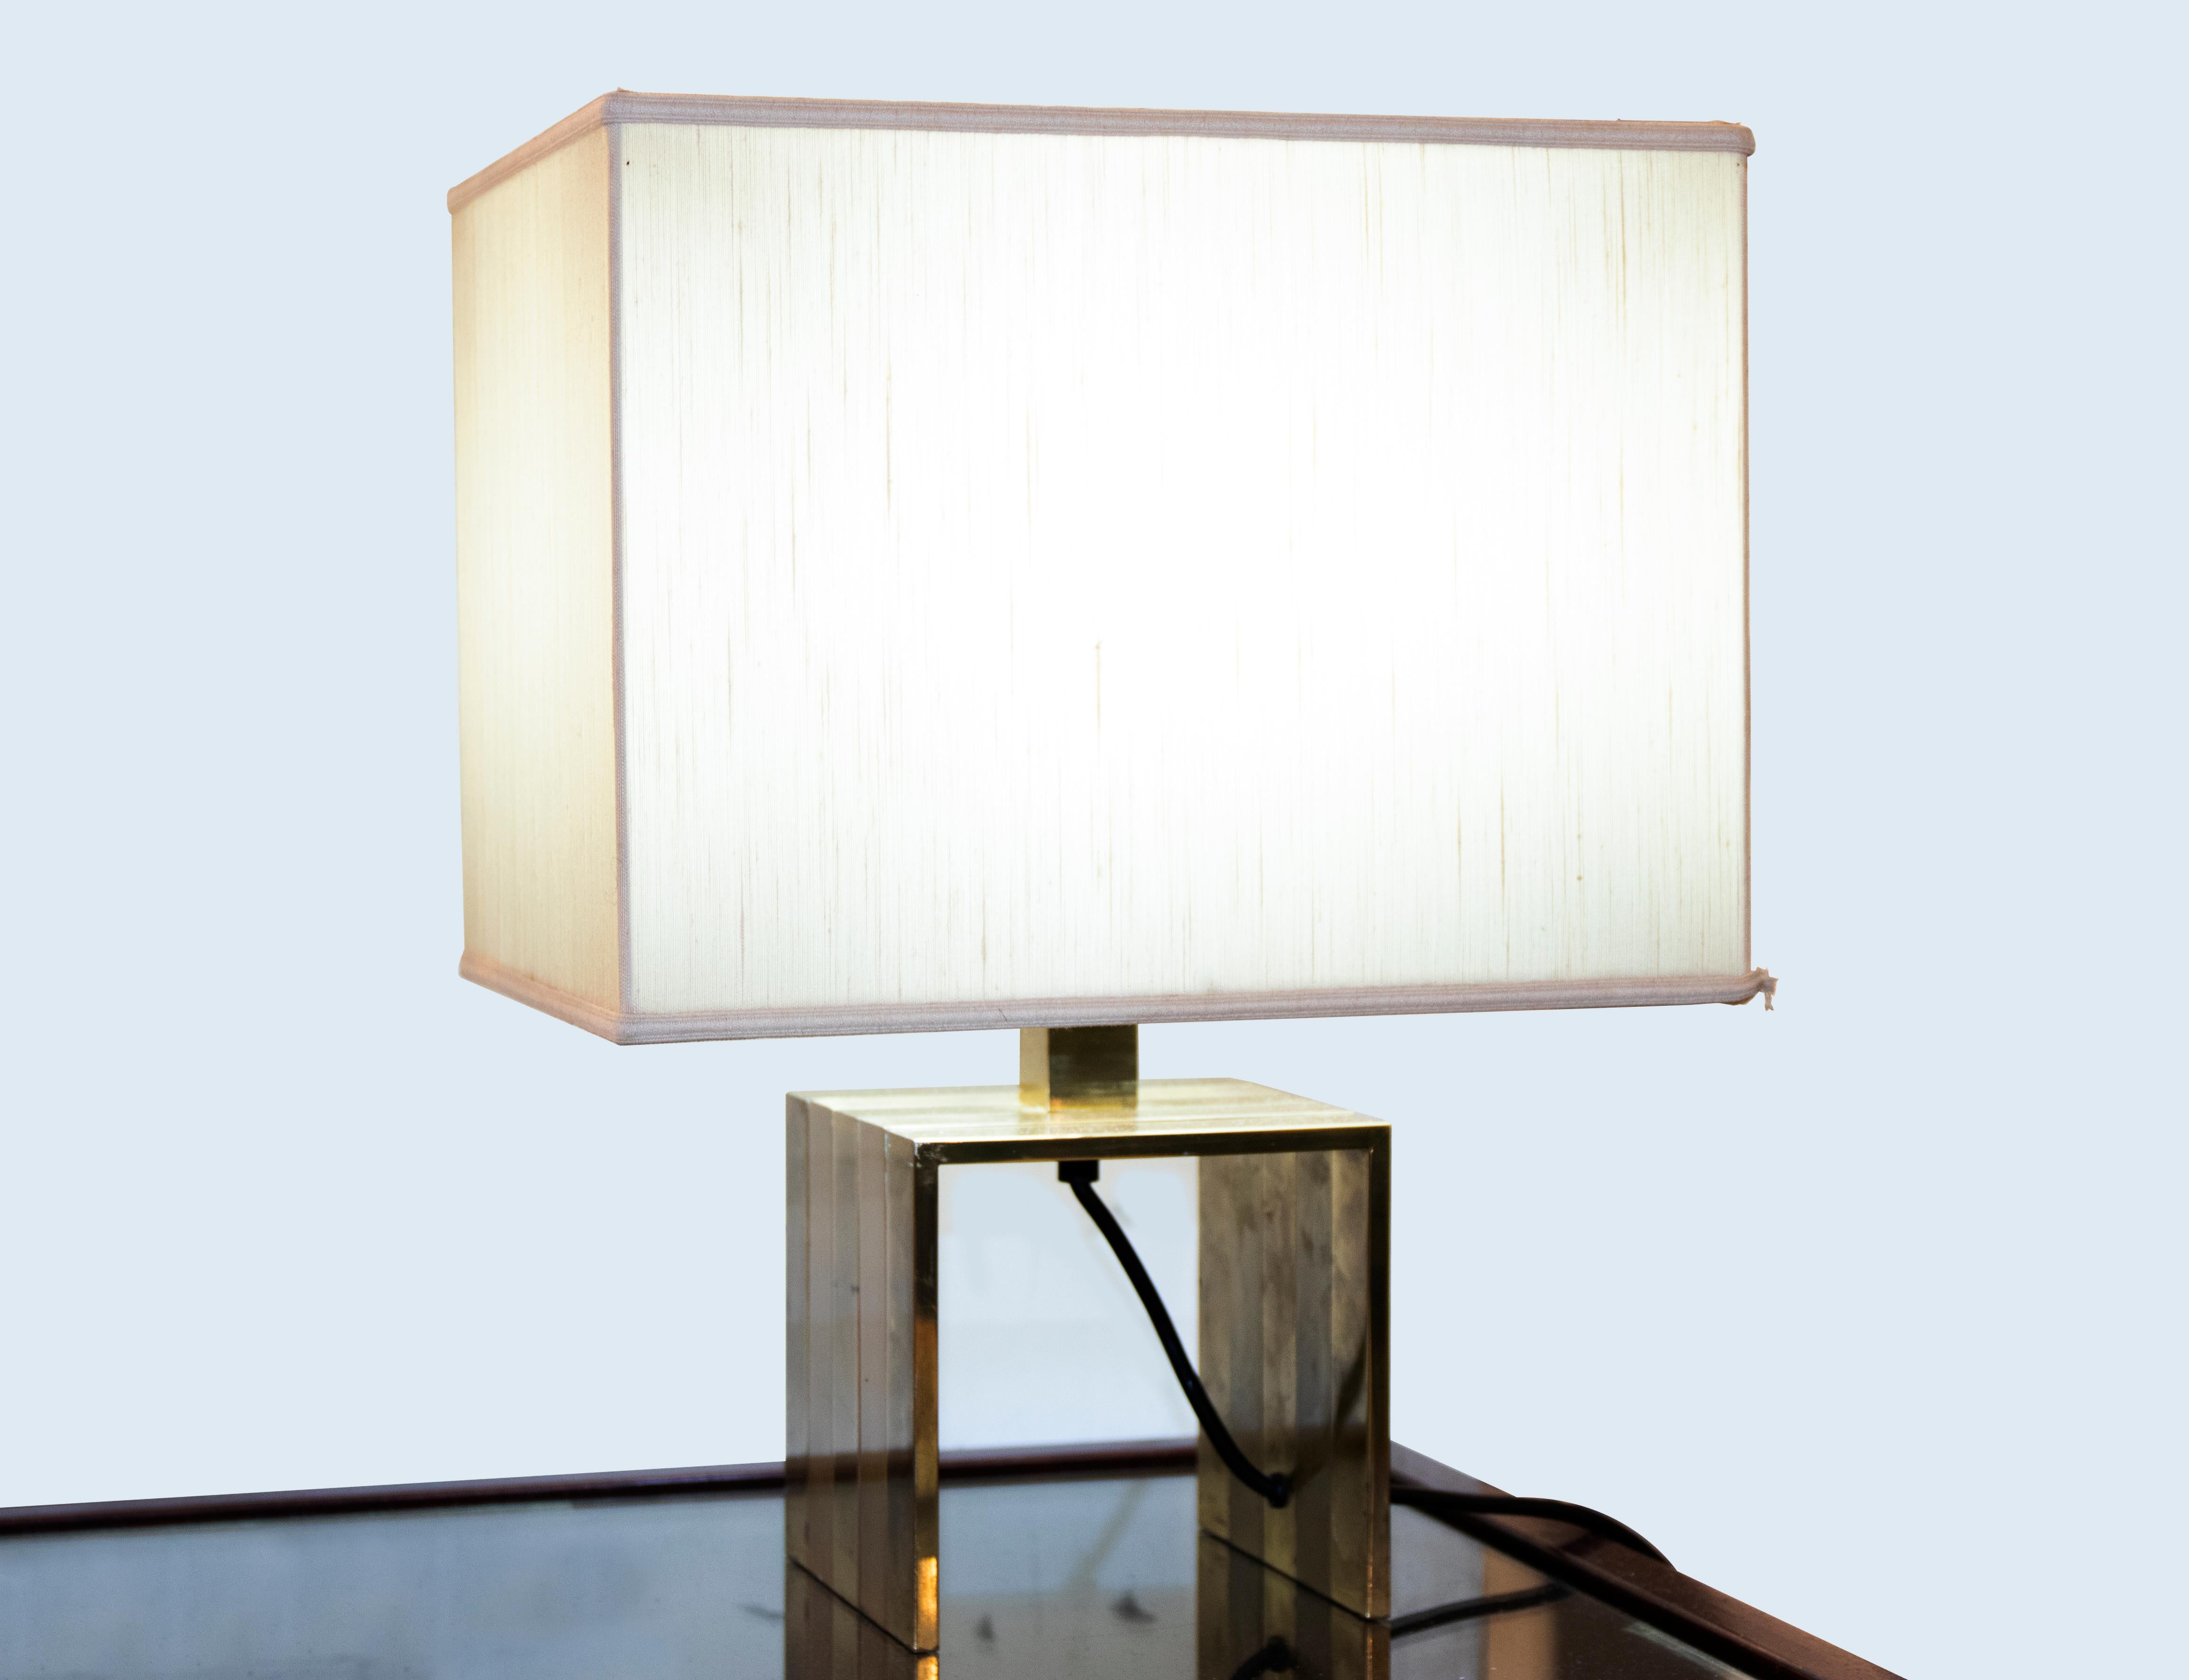 Vintage table lamp is an original design lamp realized and created in the 1960s by the Italian designer Romeo Rega (Rome, 1925-Rome, 1968). The lamp is realized in brass and has a square base

Total dimensions: 70 x 25 x 25. Base dimensions: 25 x